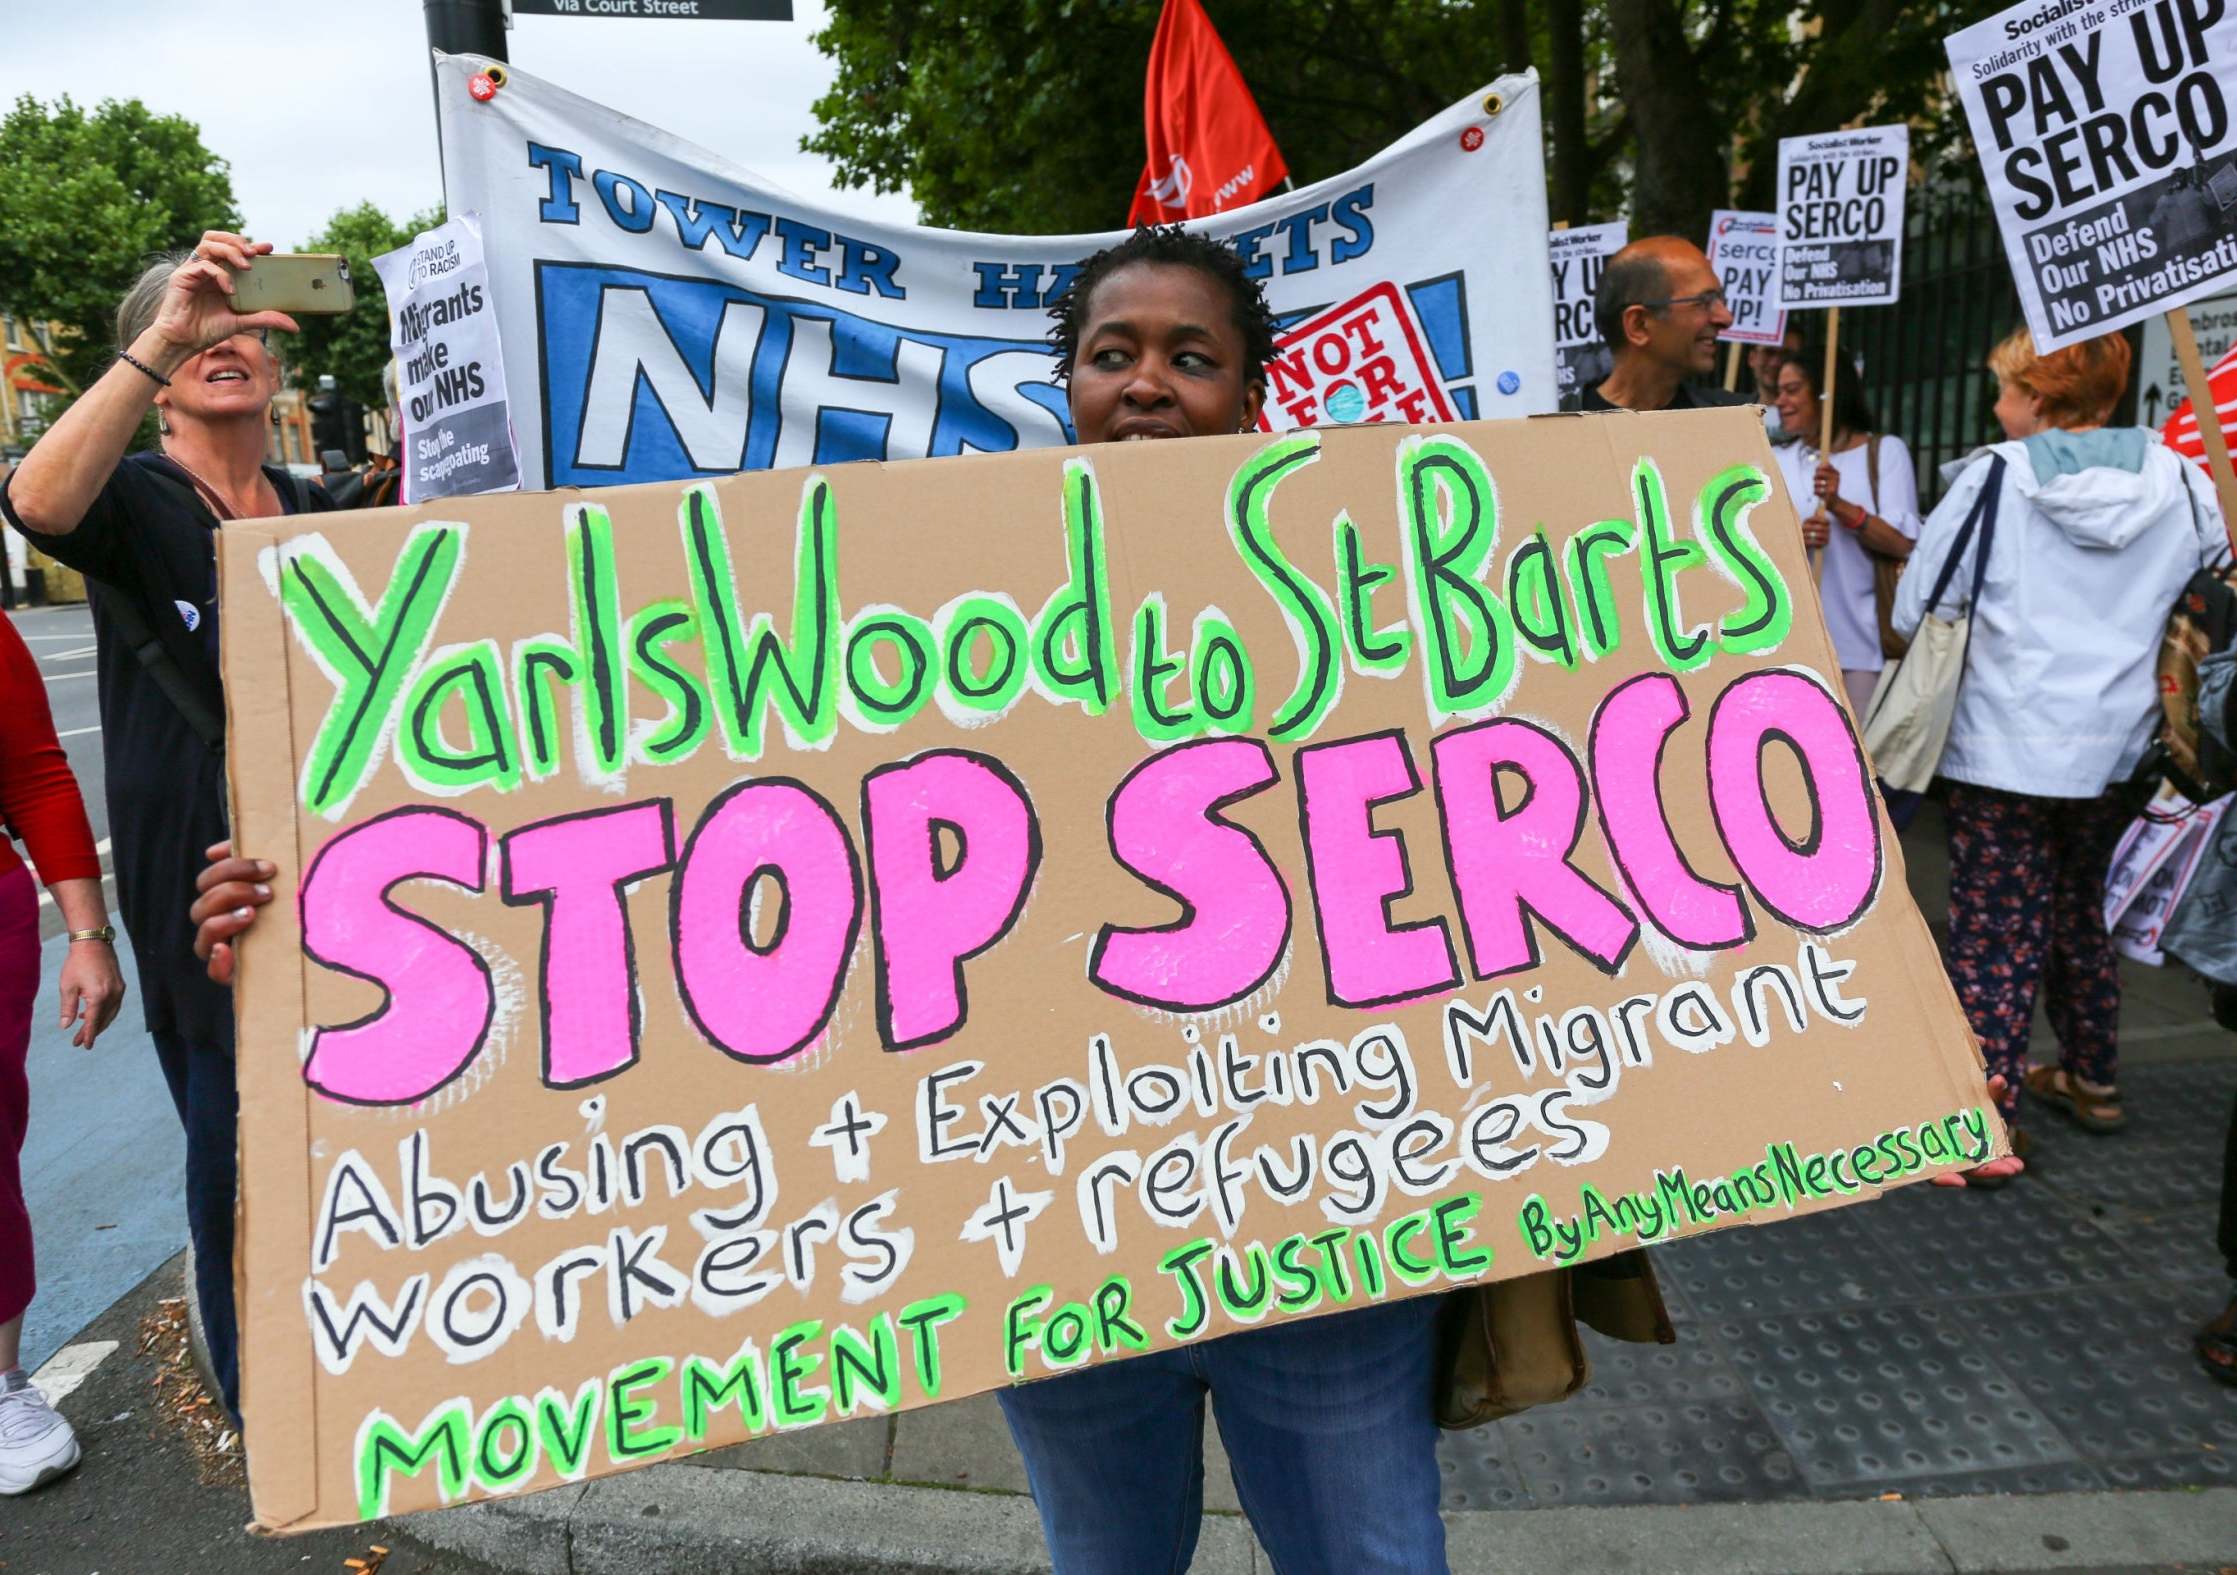 Health workers demonstrating in London in 2017 over their pay and treatment by Serco